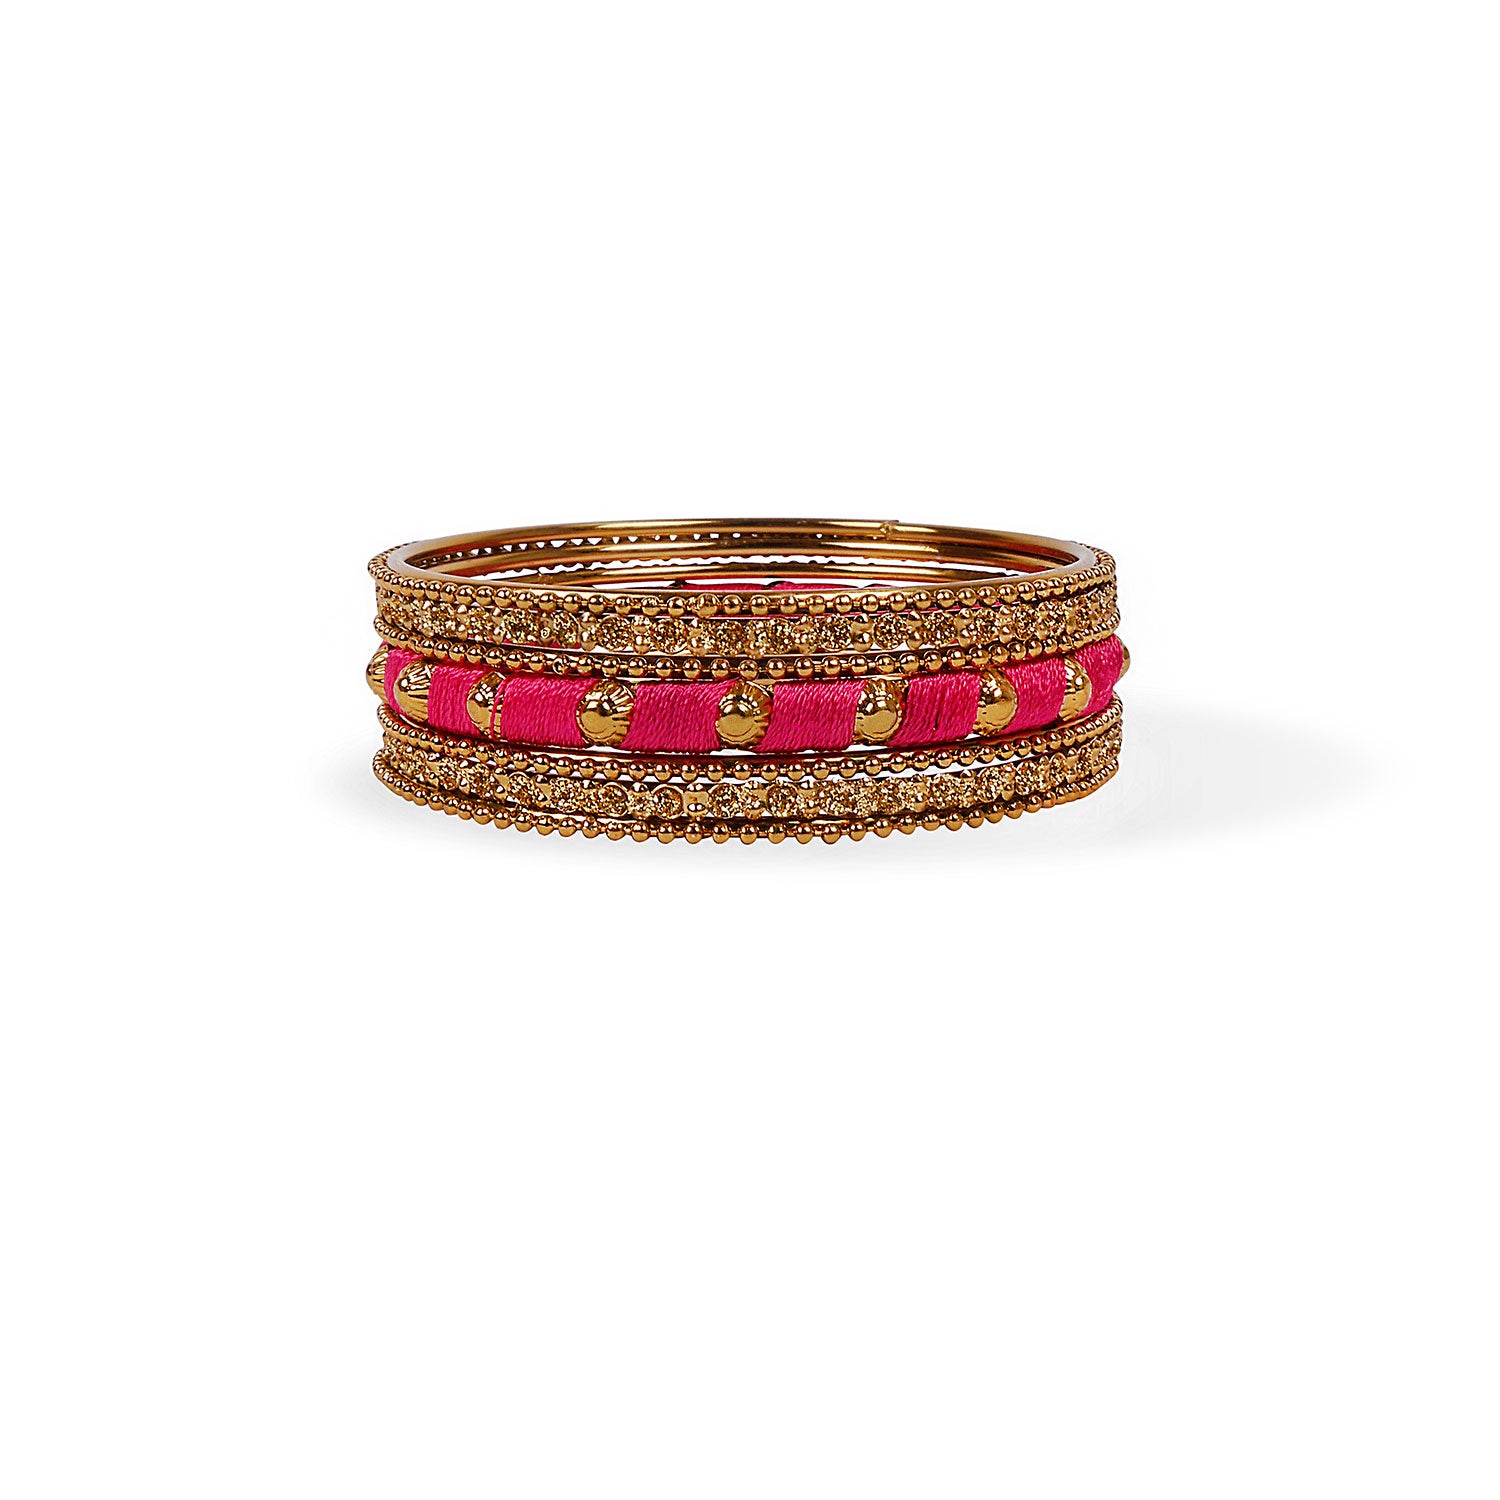 Hot Pink Thread and Antique Bangle Set